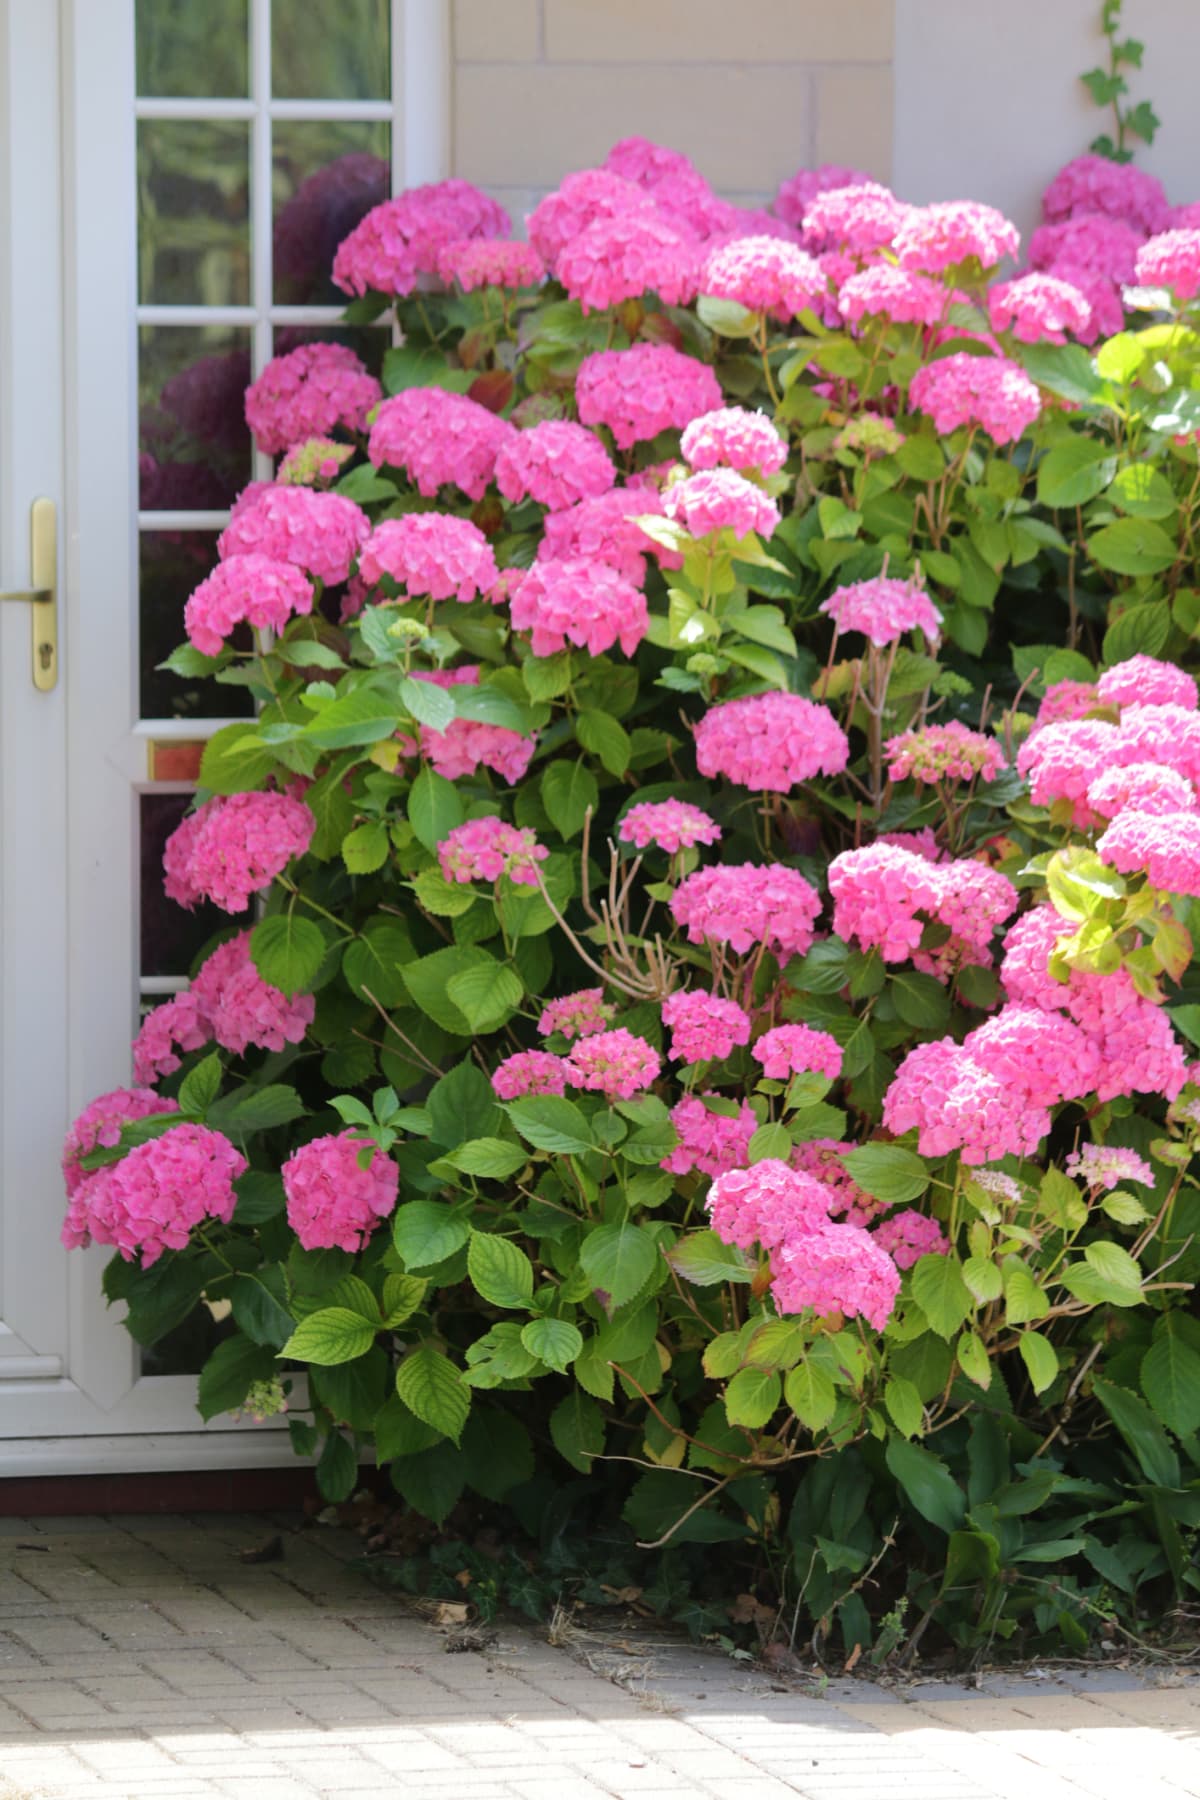 Large hydrangea bush with flowers blooming